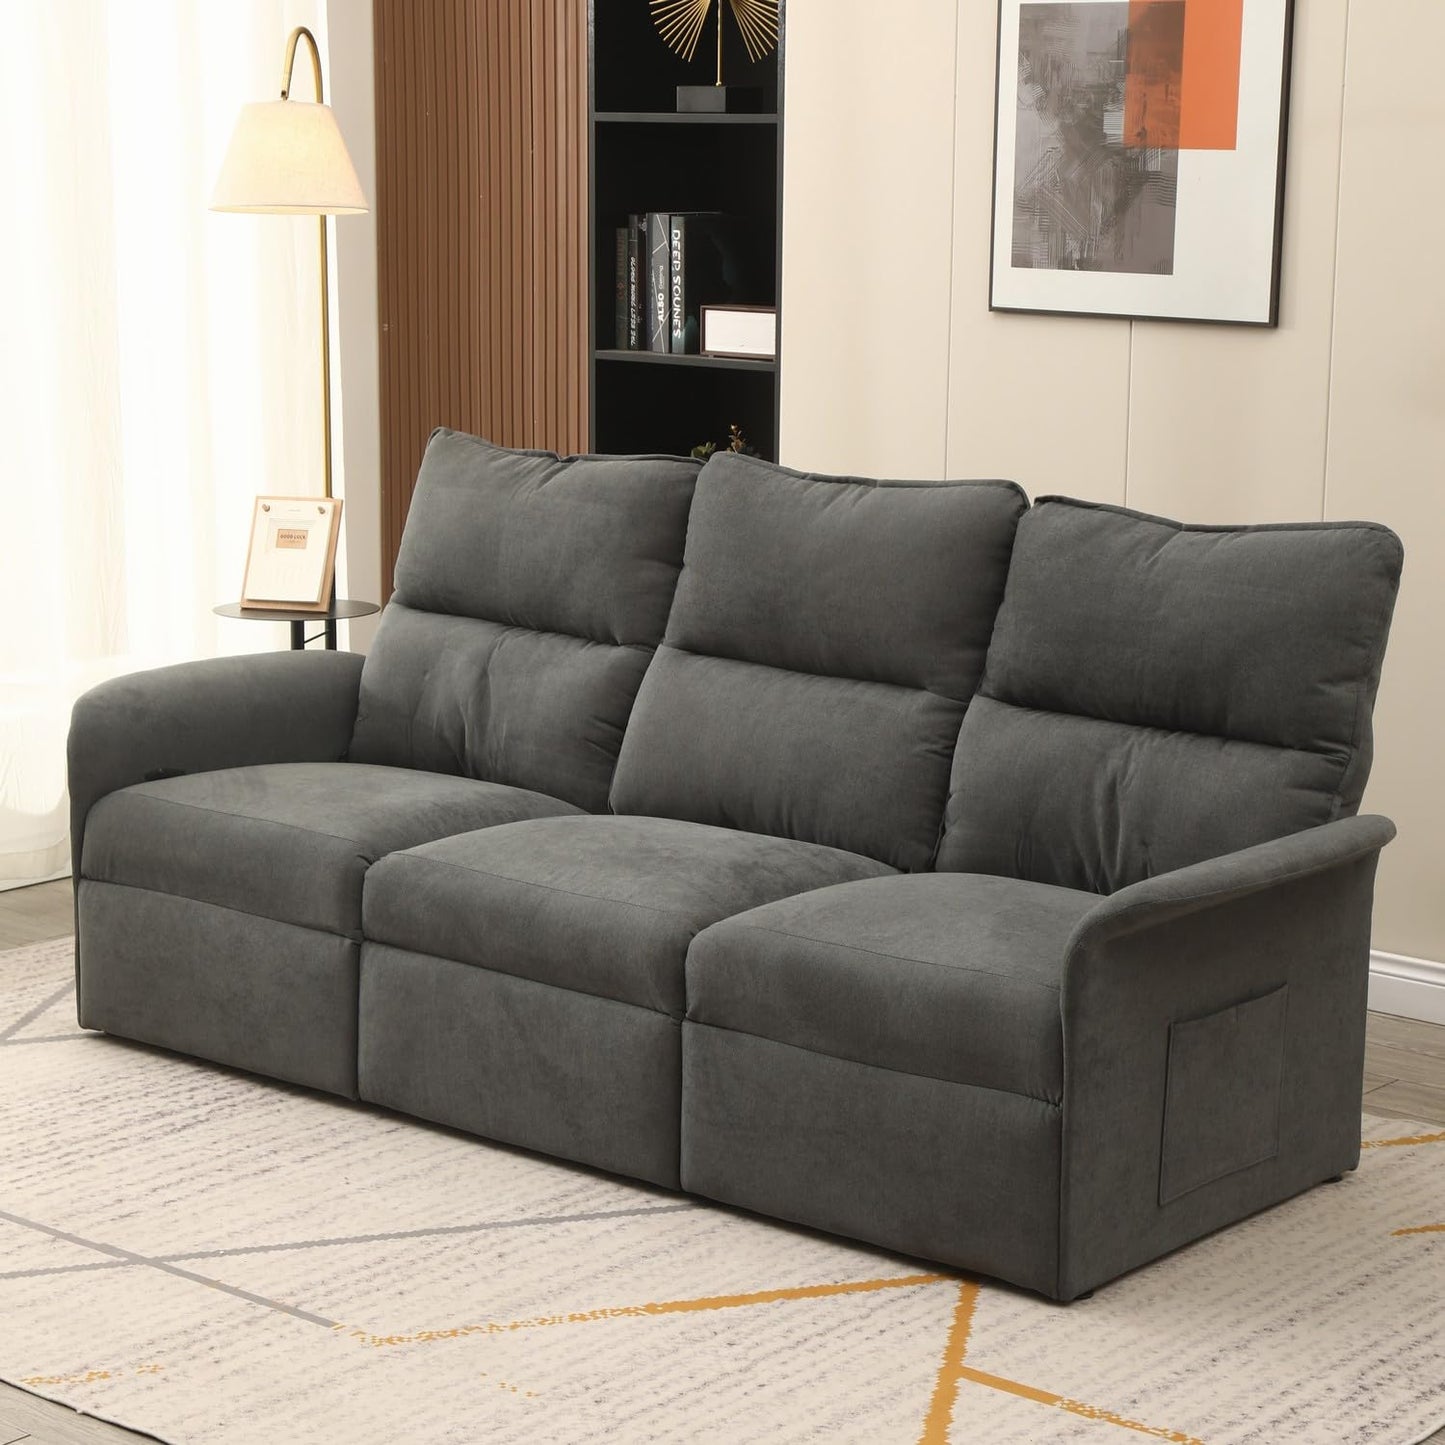 Panana Electric Power Reclining Sofas, Infinite Positions Recliner Couch with Storage Side Pockets for Small Space Living Room (3 Seater)